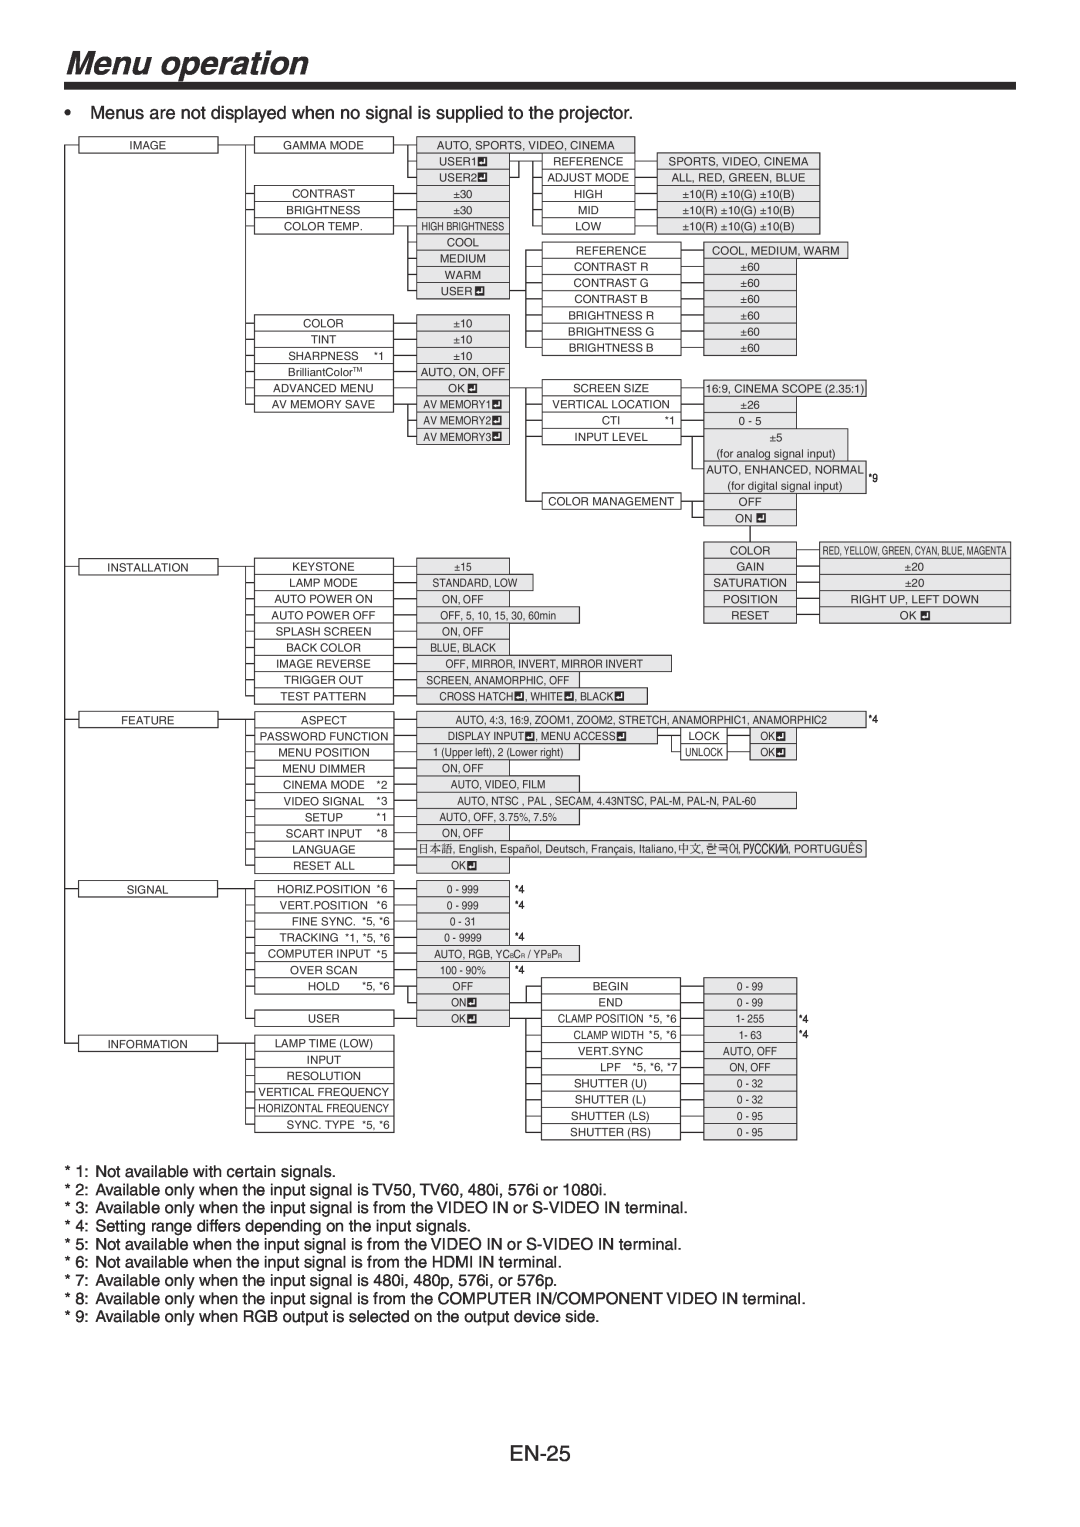 Mitsubishi Electronics HC3800 user manual Menu operation, Not available with certain signals 